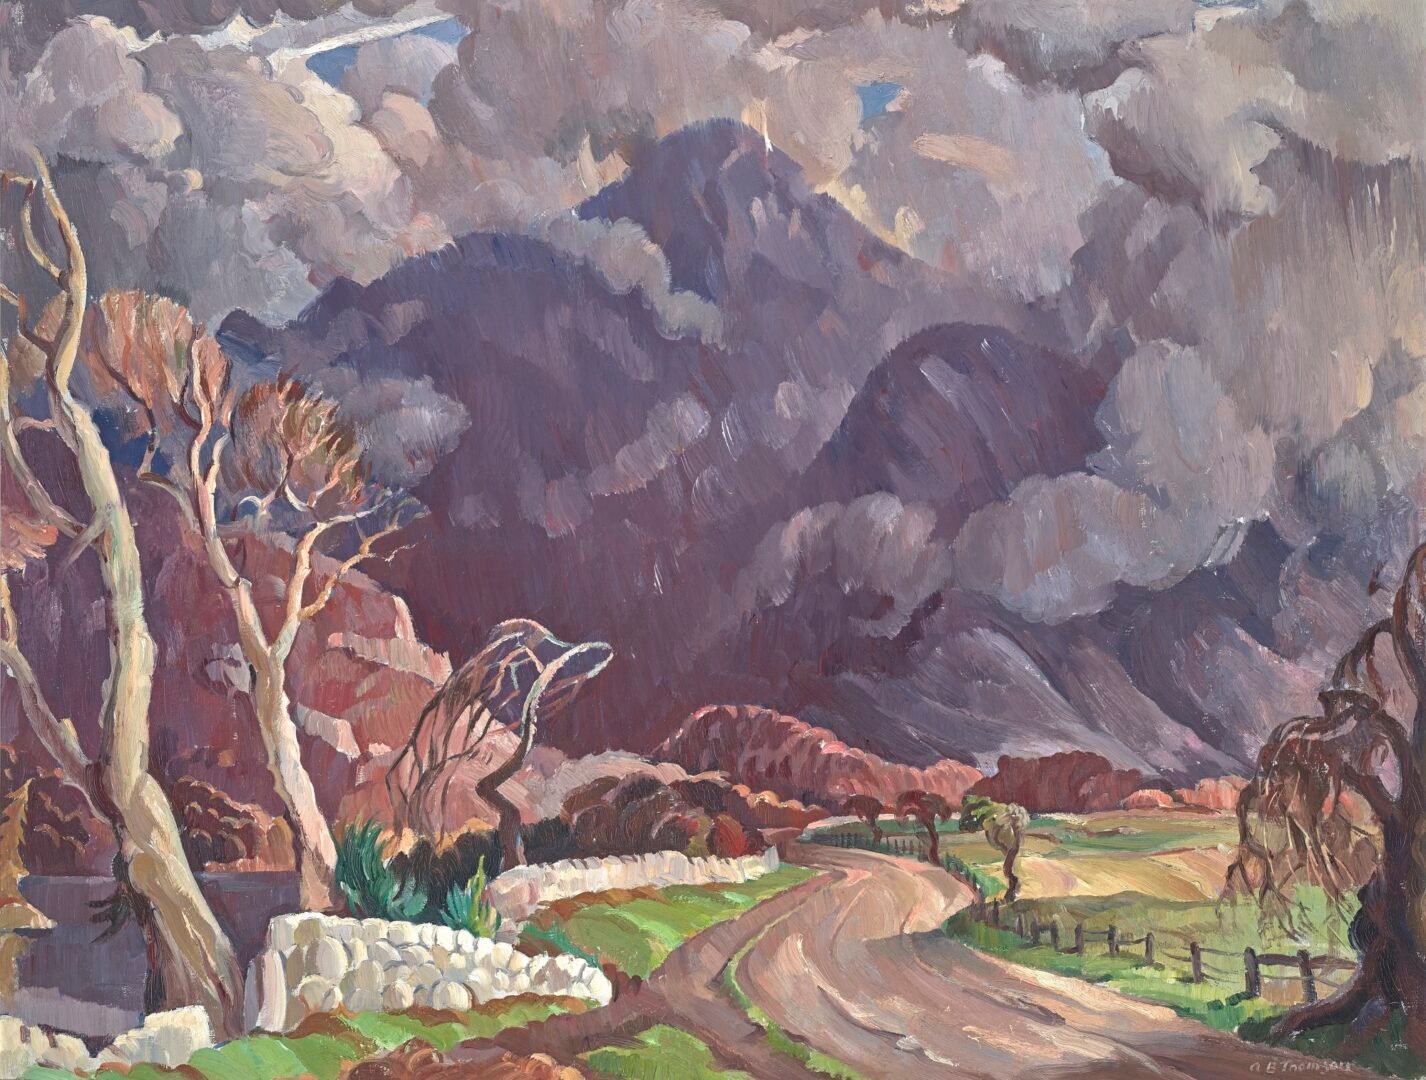 Adam Bruce Thomson, Painting of The Road to Ben Cruachan